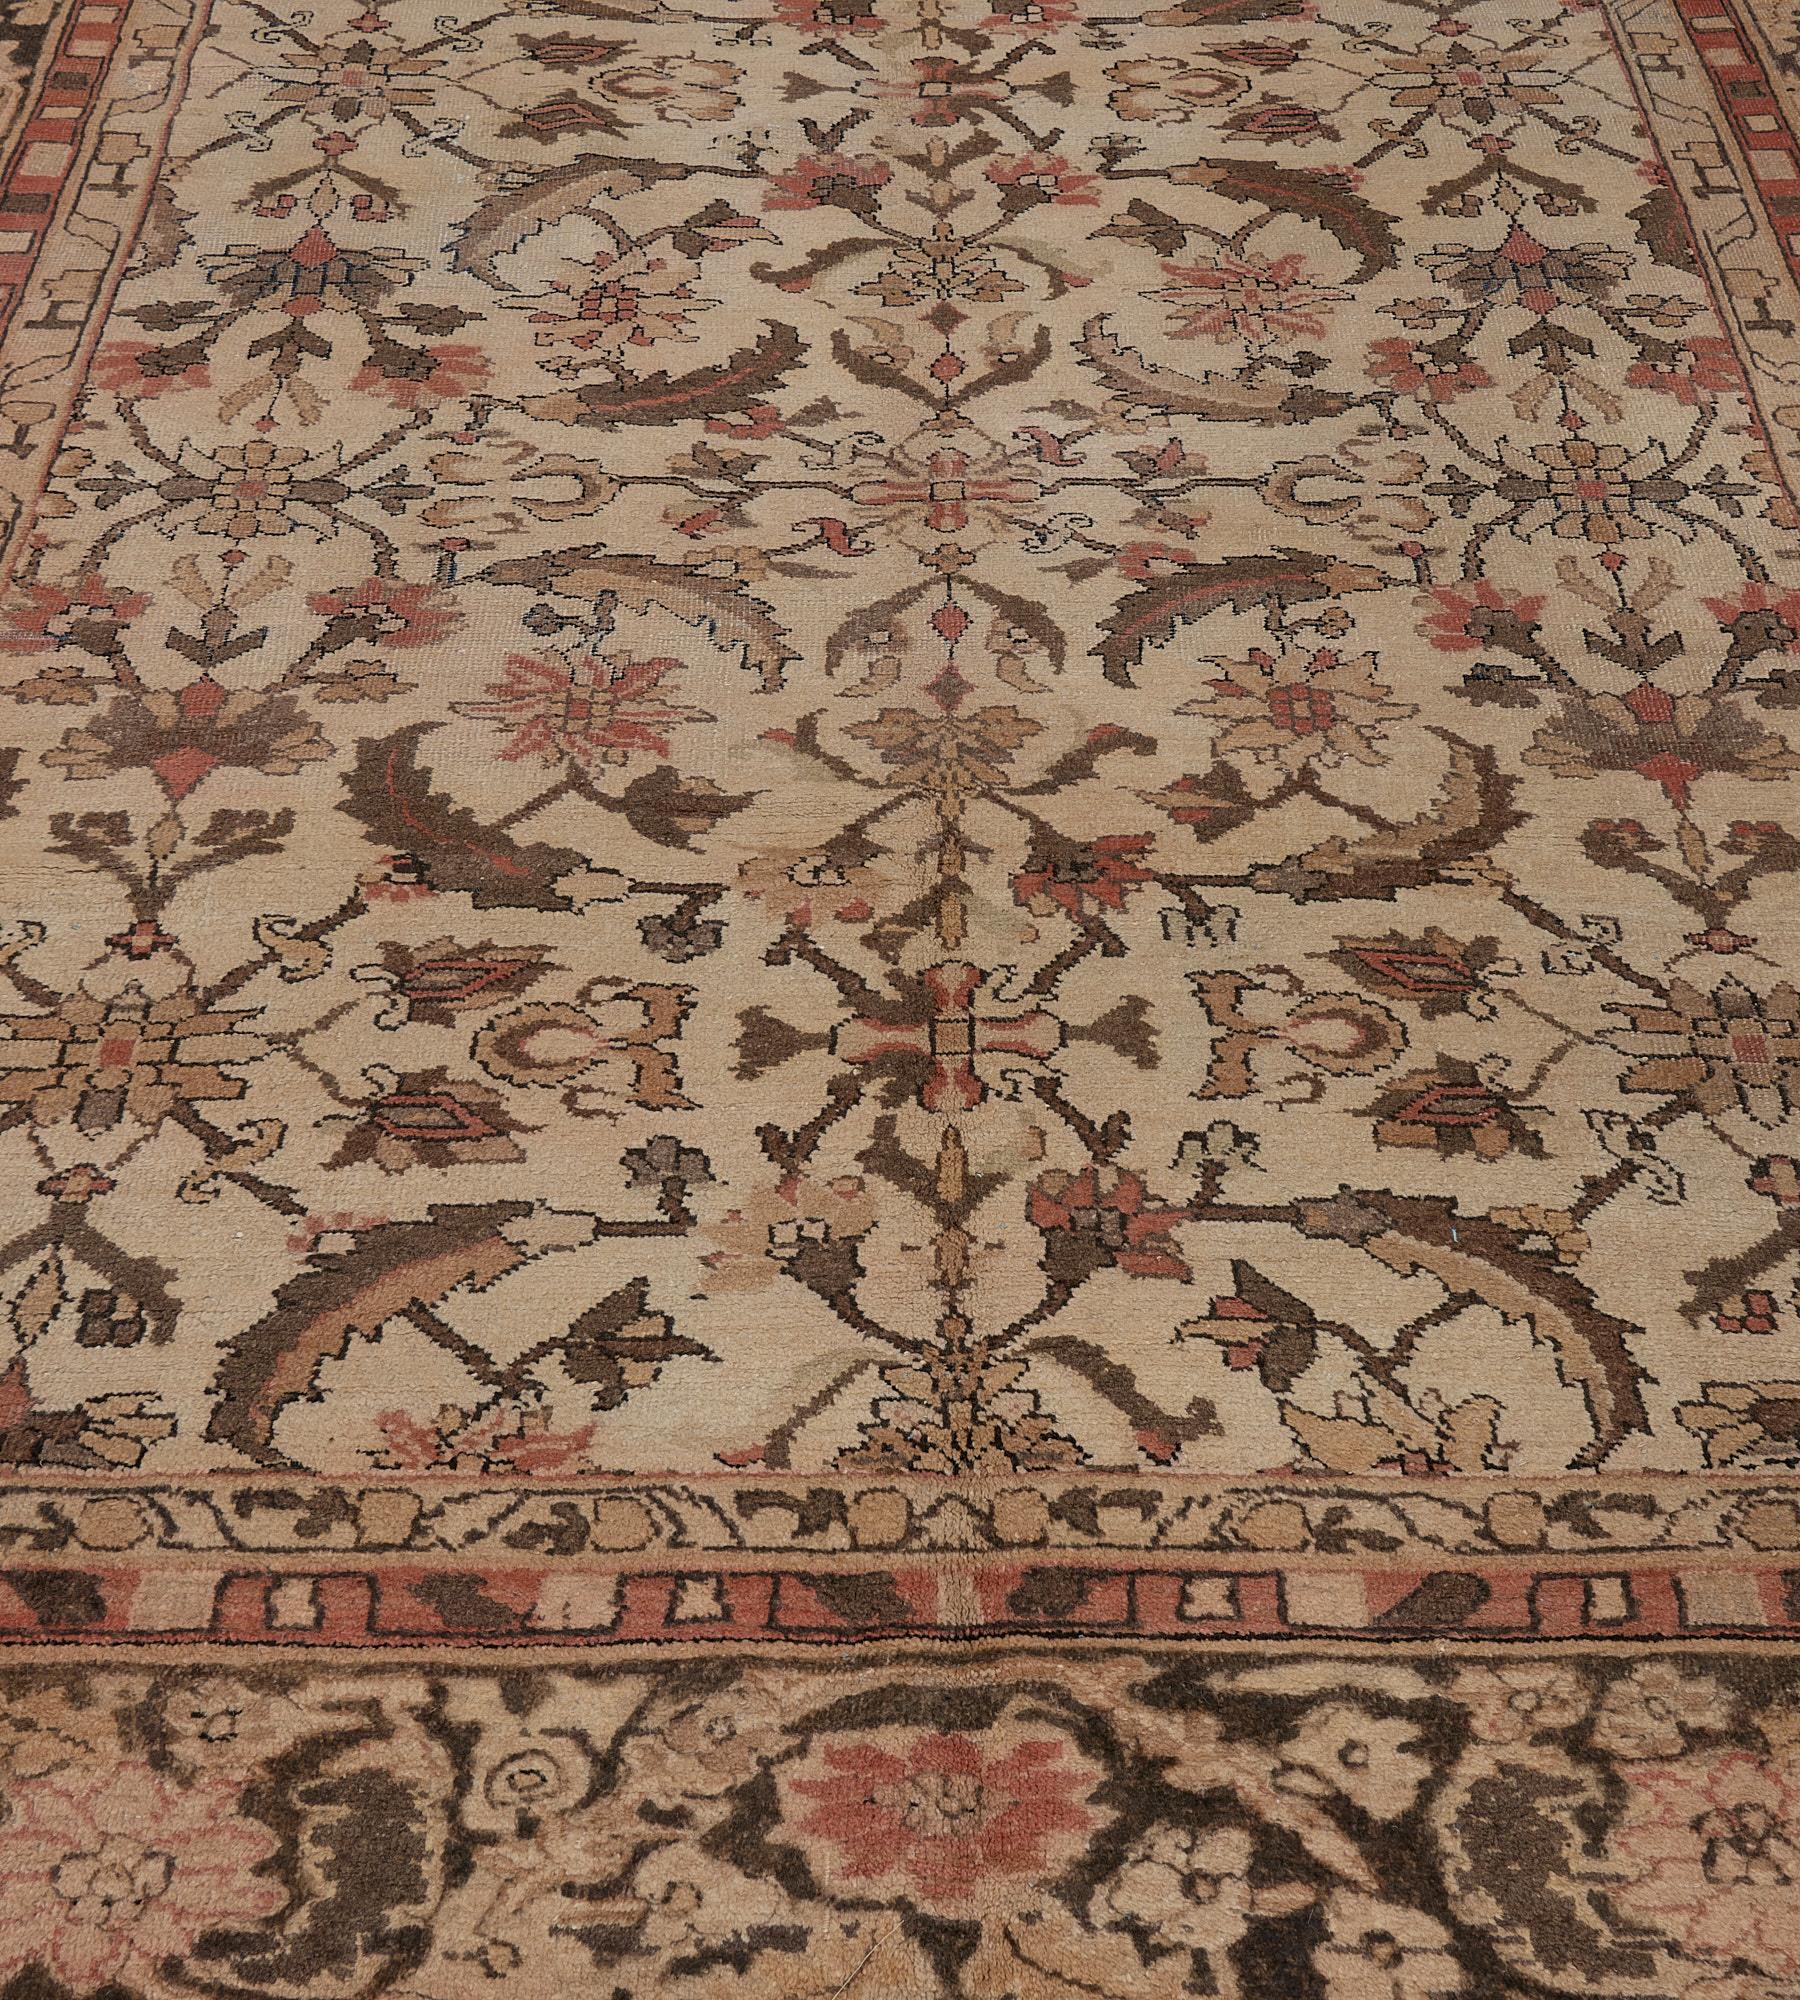 This traditional hand-woven Indian Amritsar rug has an ivory field with overall majestic herati pattern, in a deep umber scrolling rosette vine border, between complementary geometric stripes.